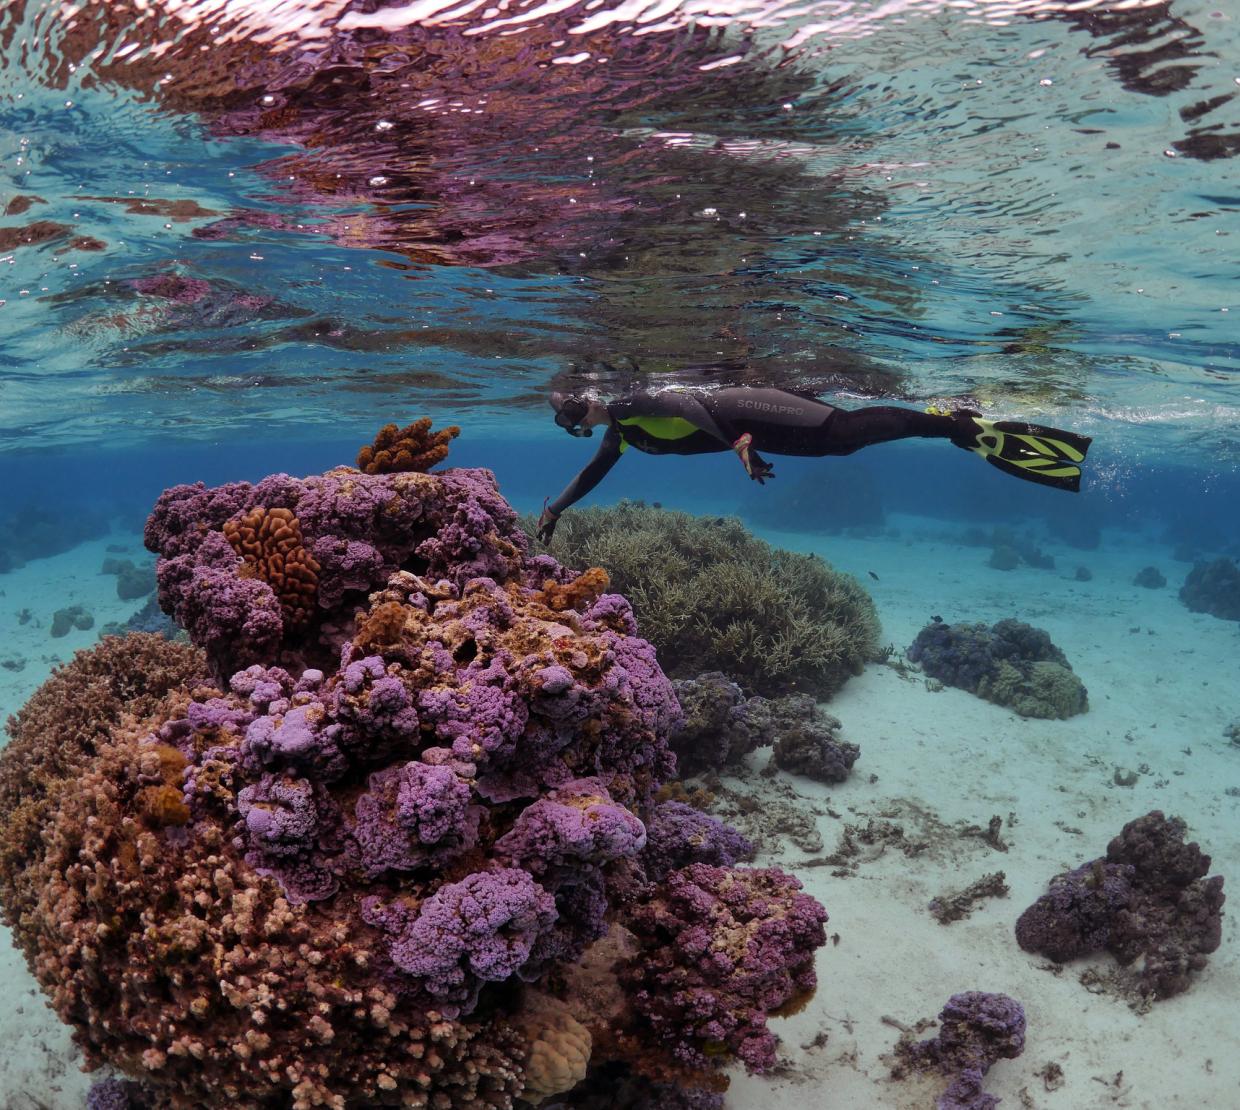 Coral microbiologist Rebecca Vega Thurber snorkeling above a mass of coral in clear waters.